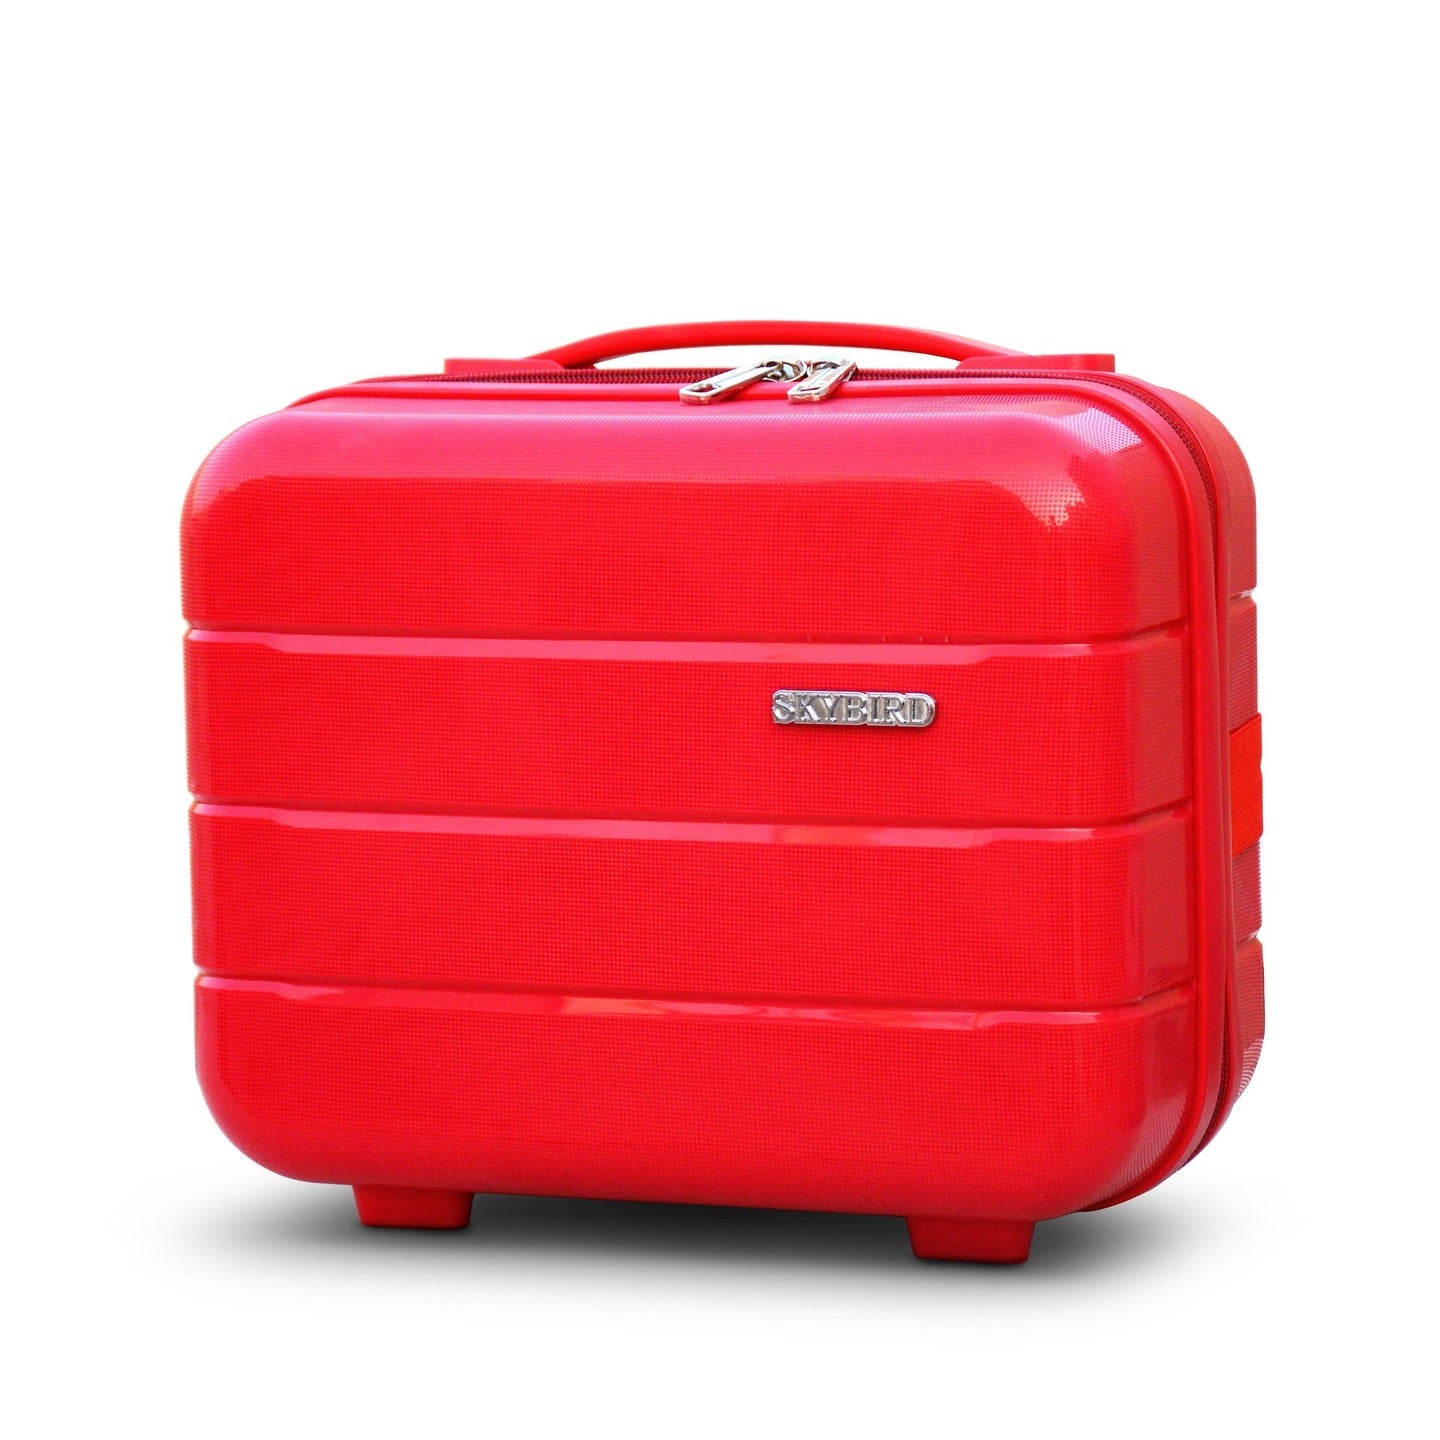 Ceramic Smooth PP Beauty Case Red Colour Lightweight Cosmetics Bag Zaappy.com